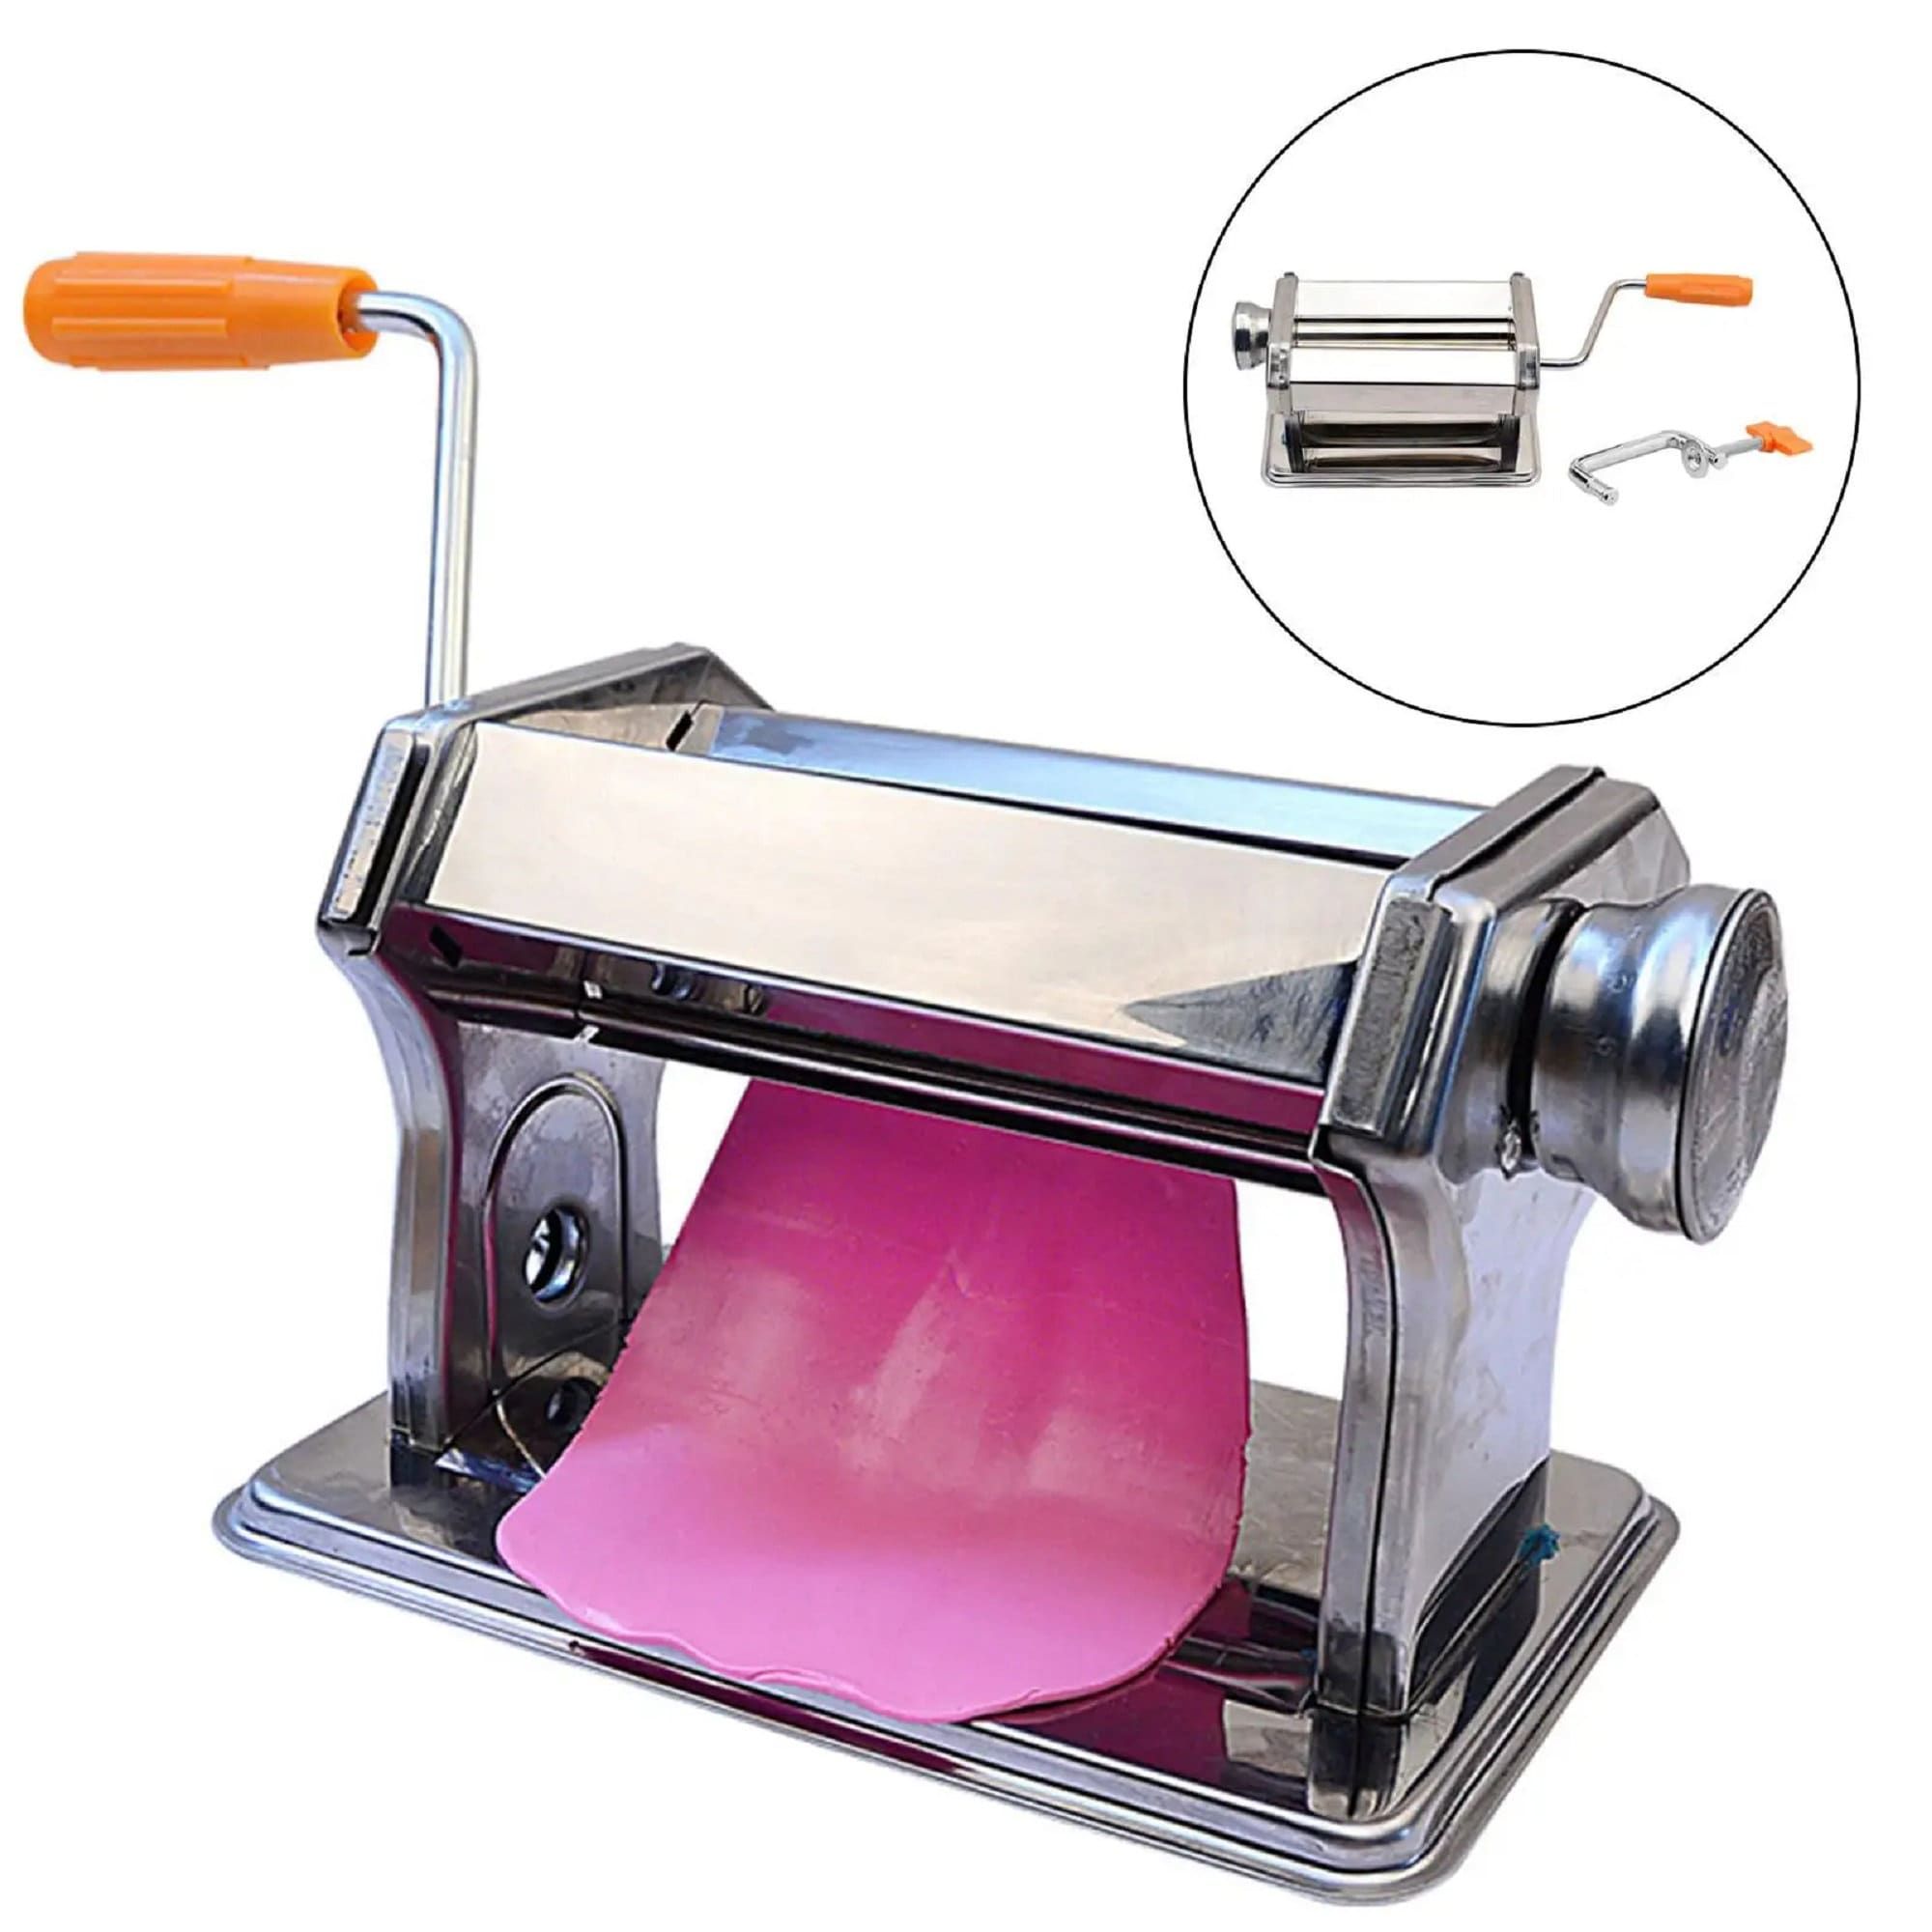 Clay Press Fondant Roller Pasta Press Press With Adjustable Rollers for  Clay and Baking 